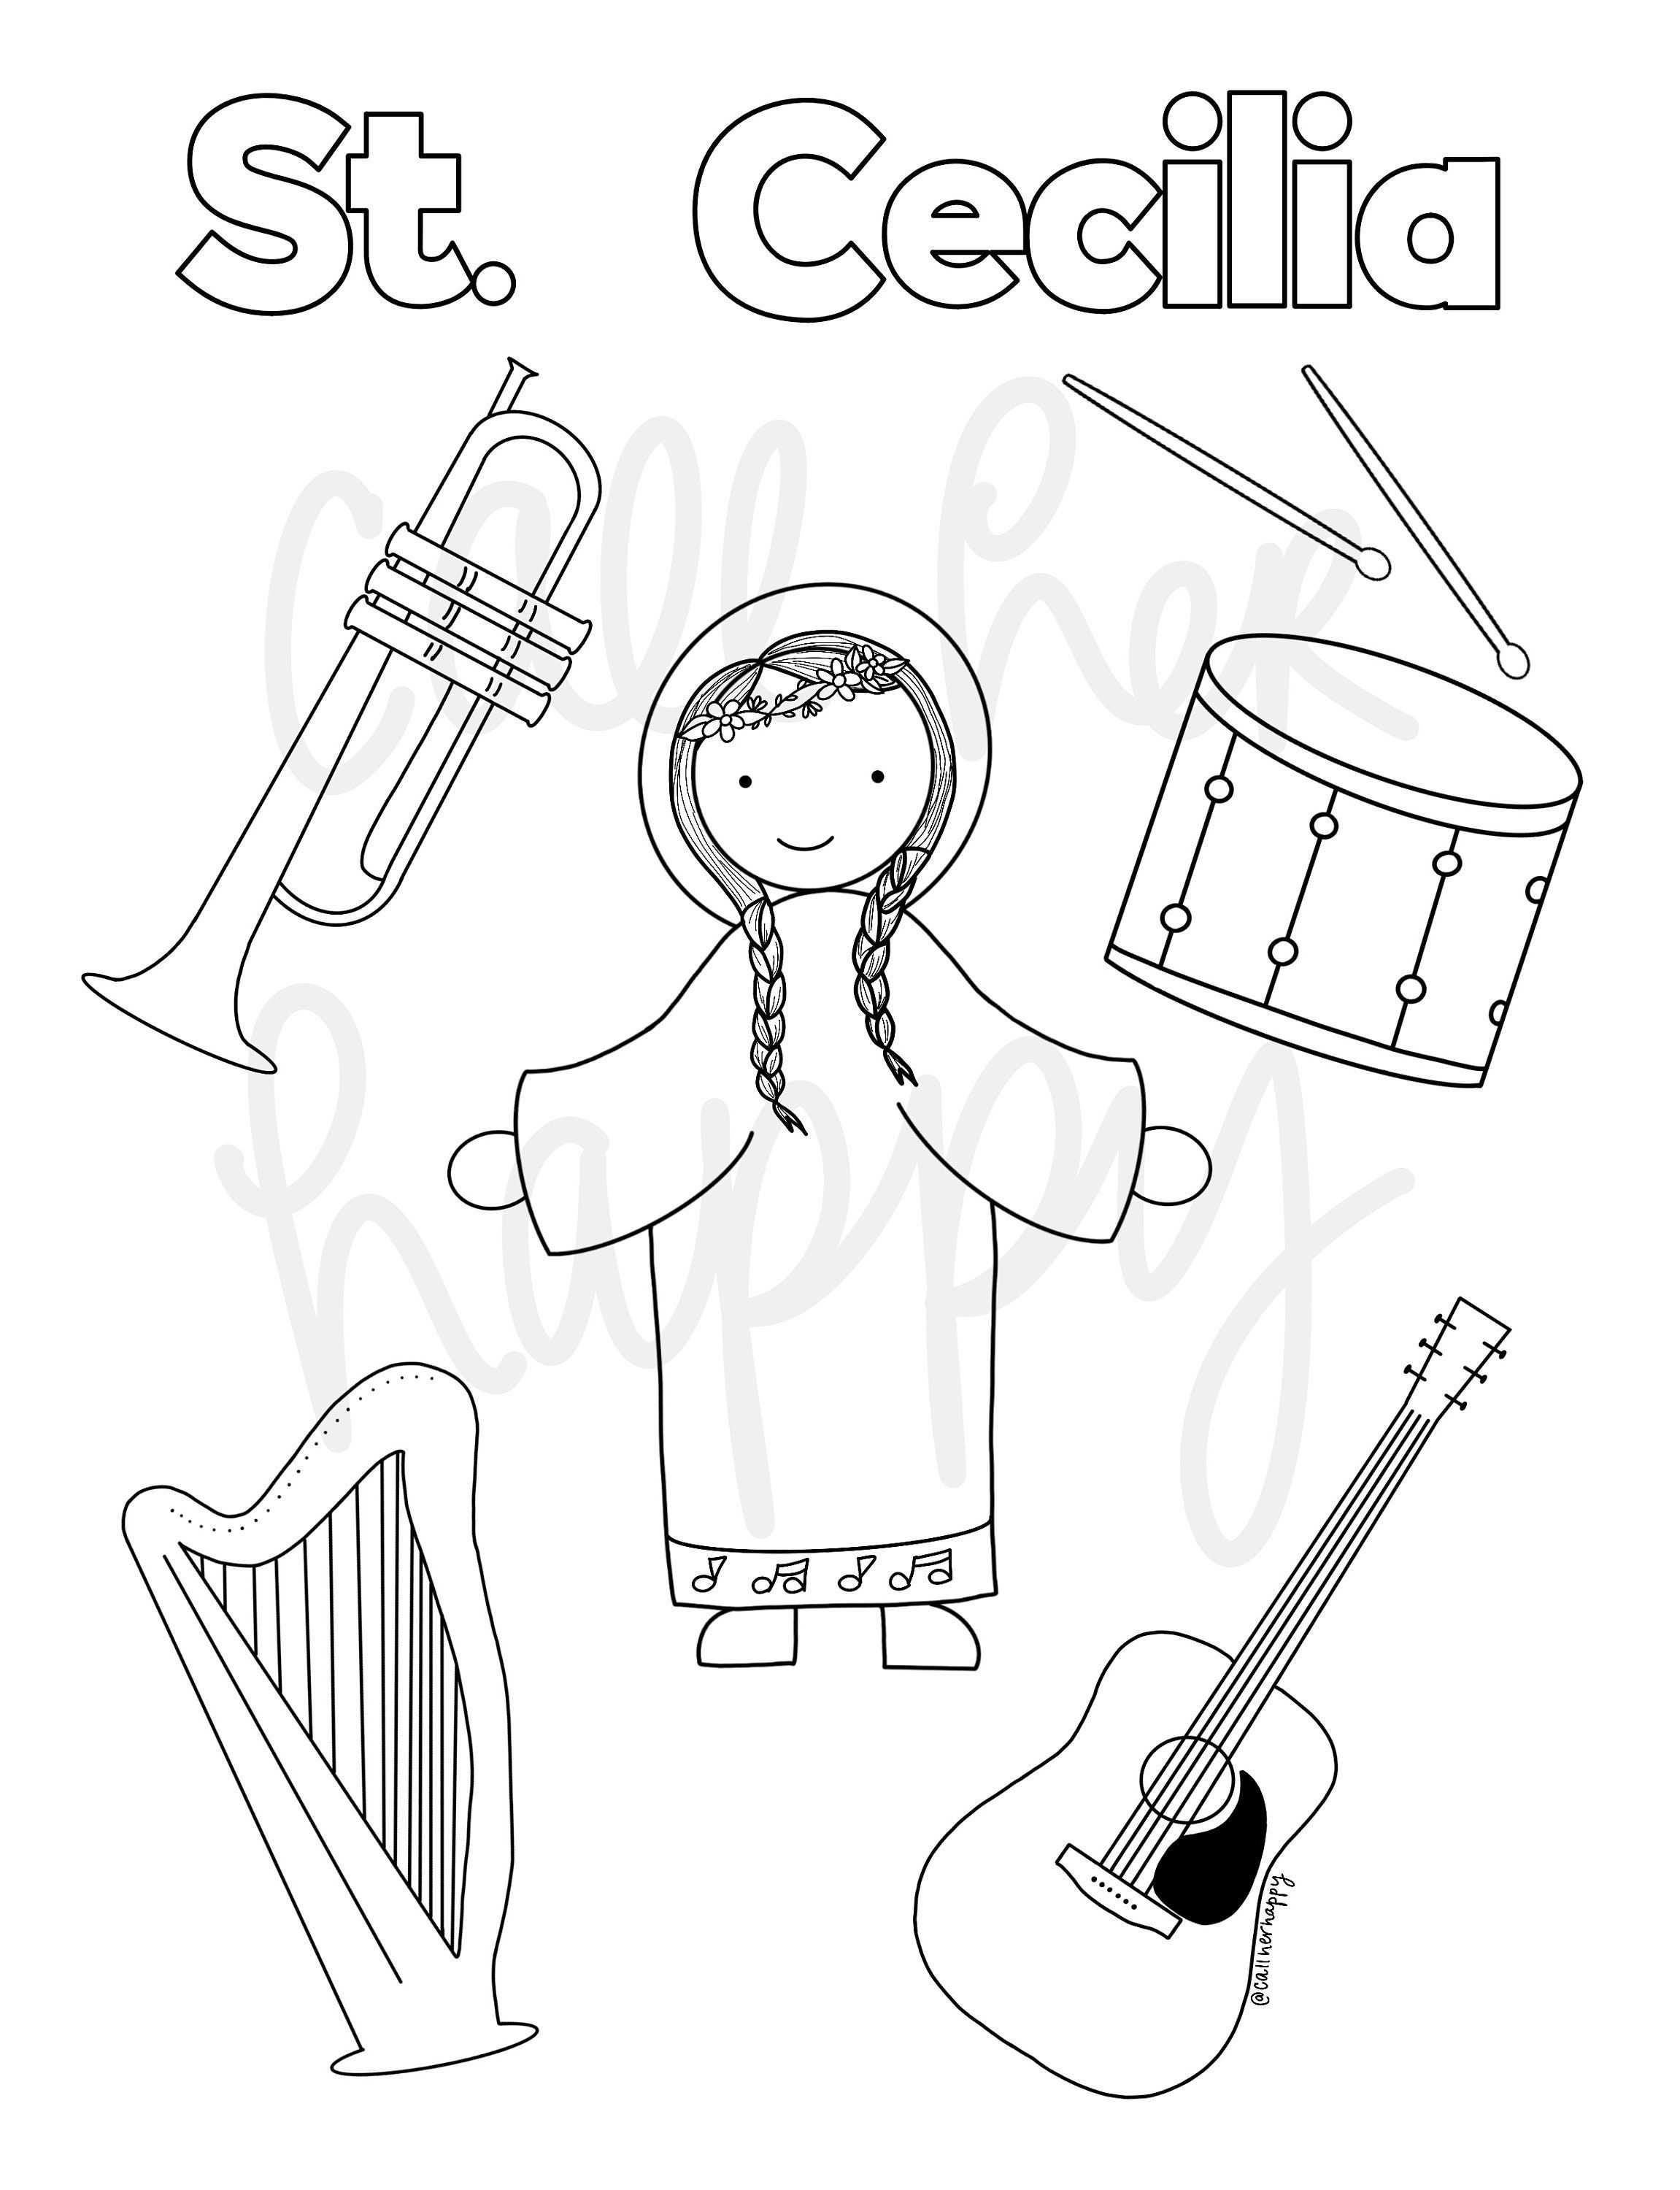 St cecilia music class coloring page sheet liturgical year